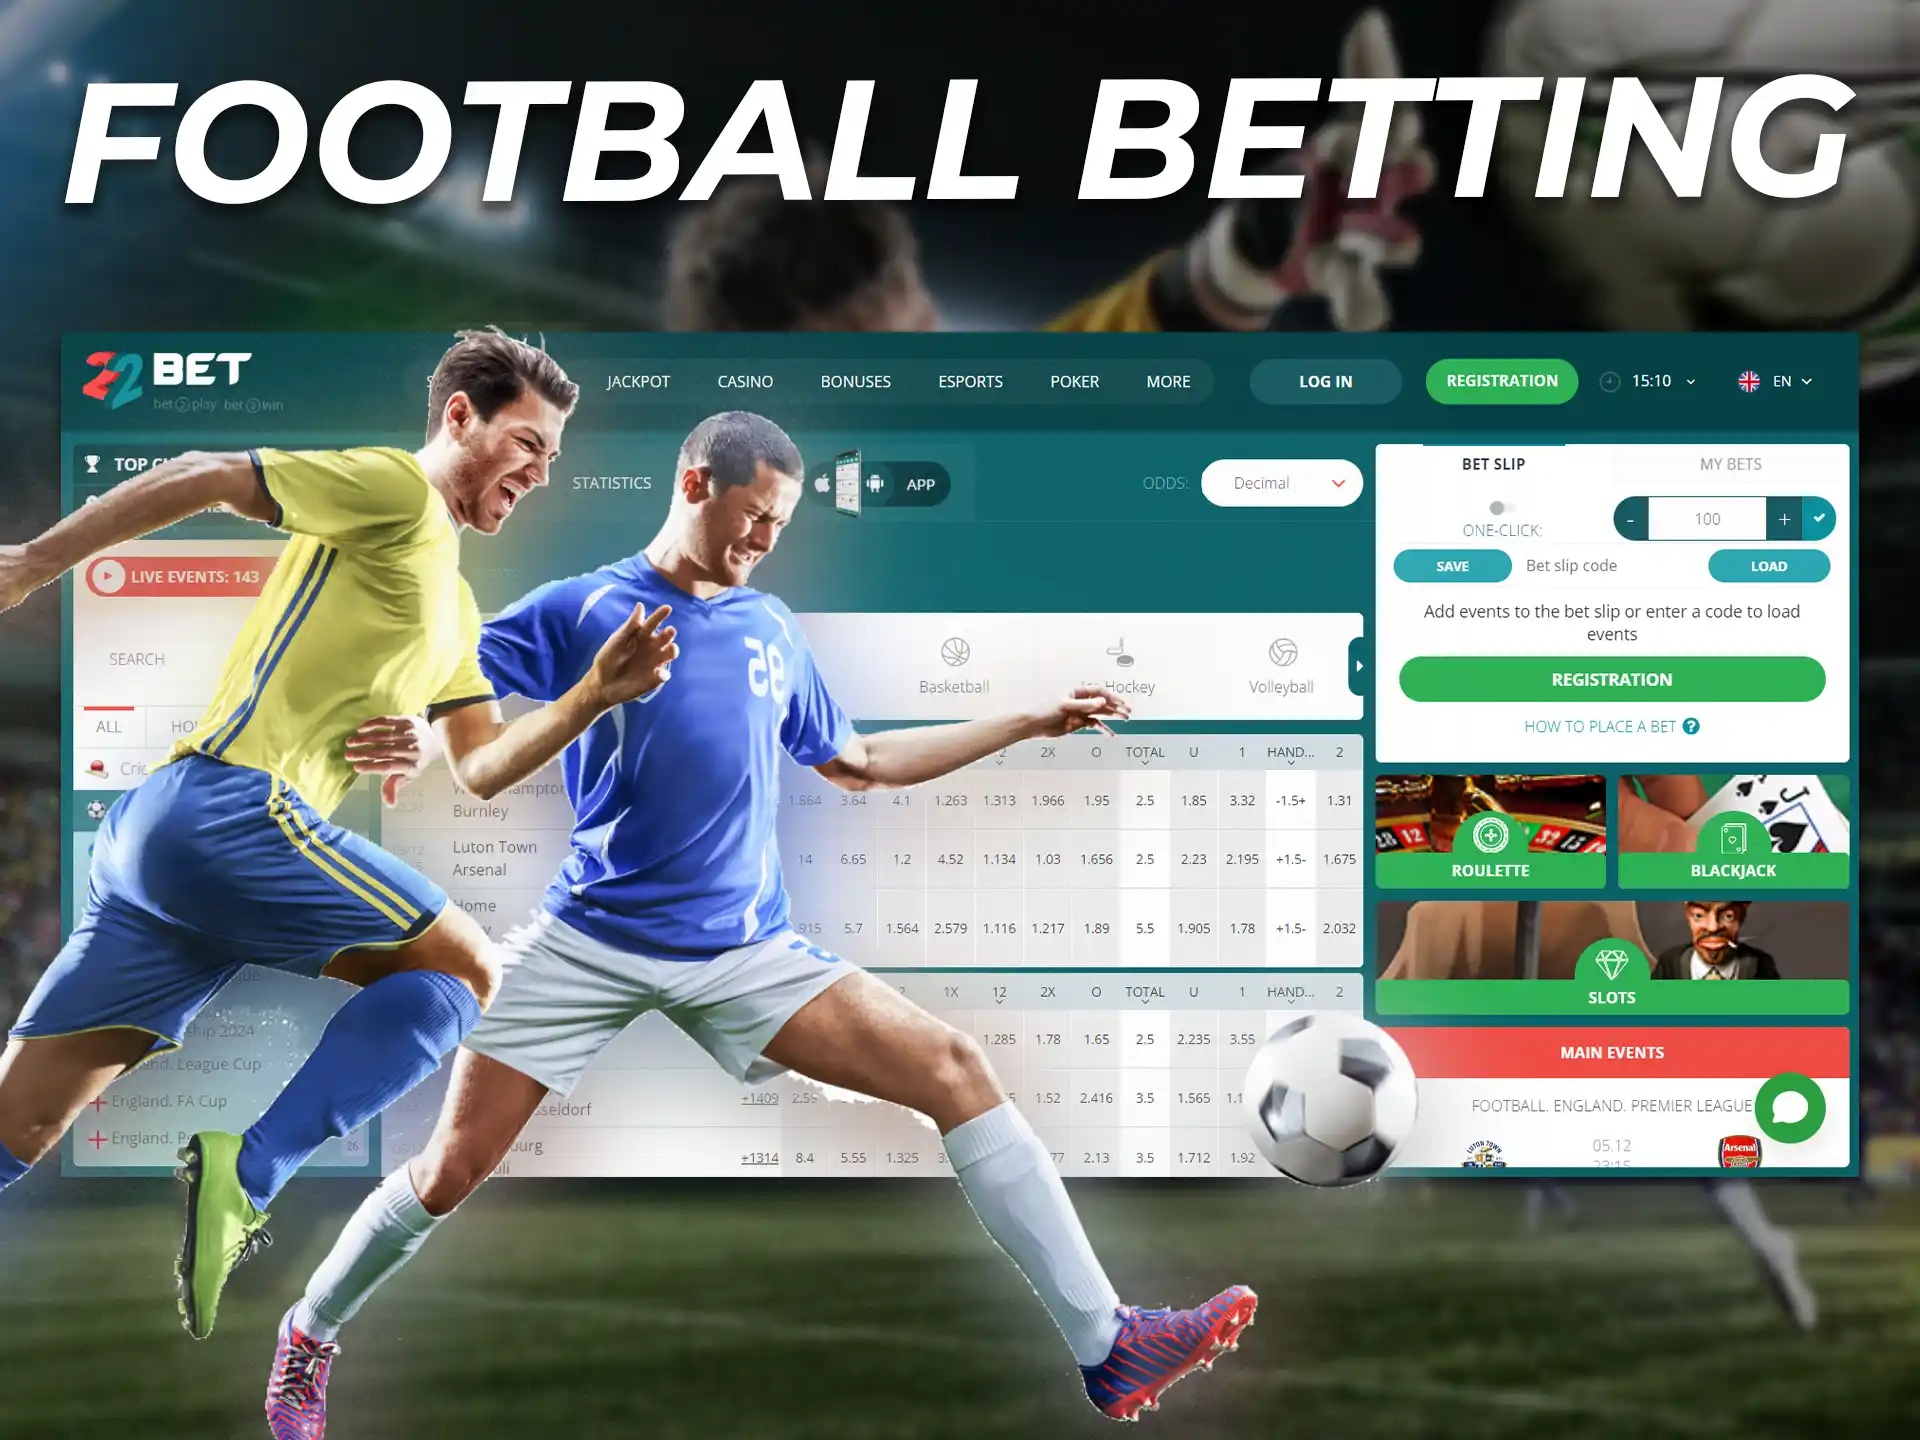 Choose a reliable and reputable bookmaker and bet on football to win money.